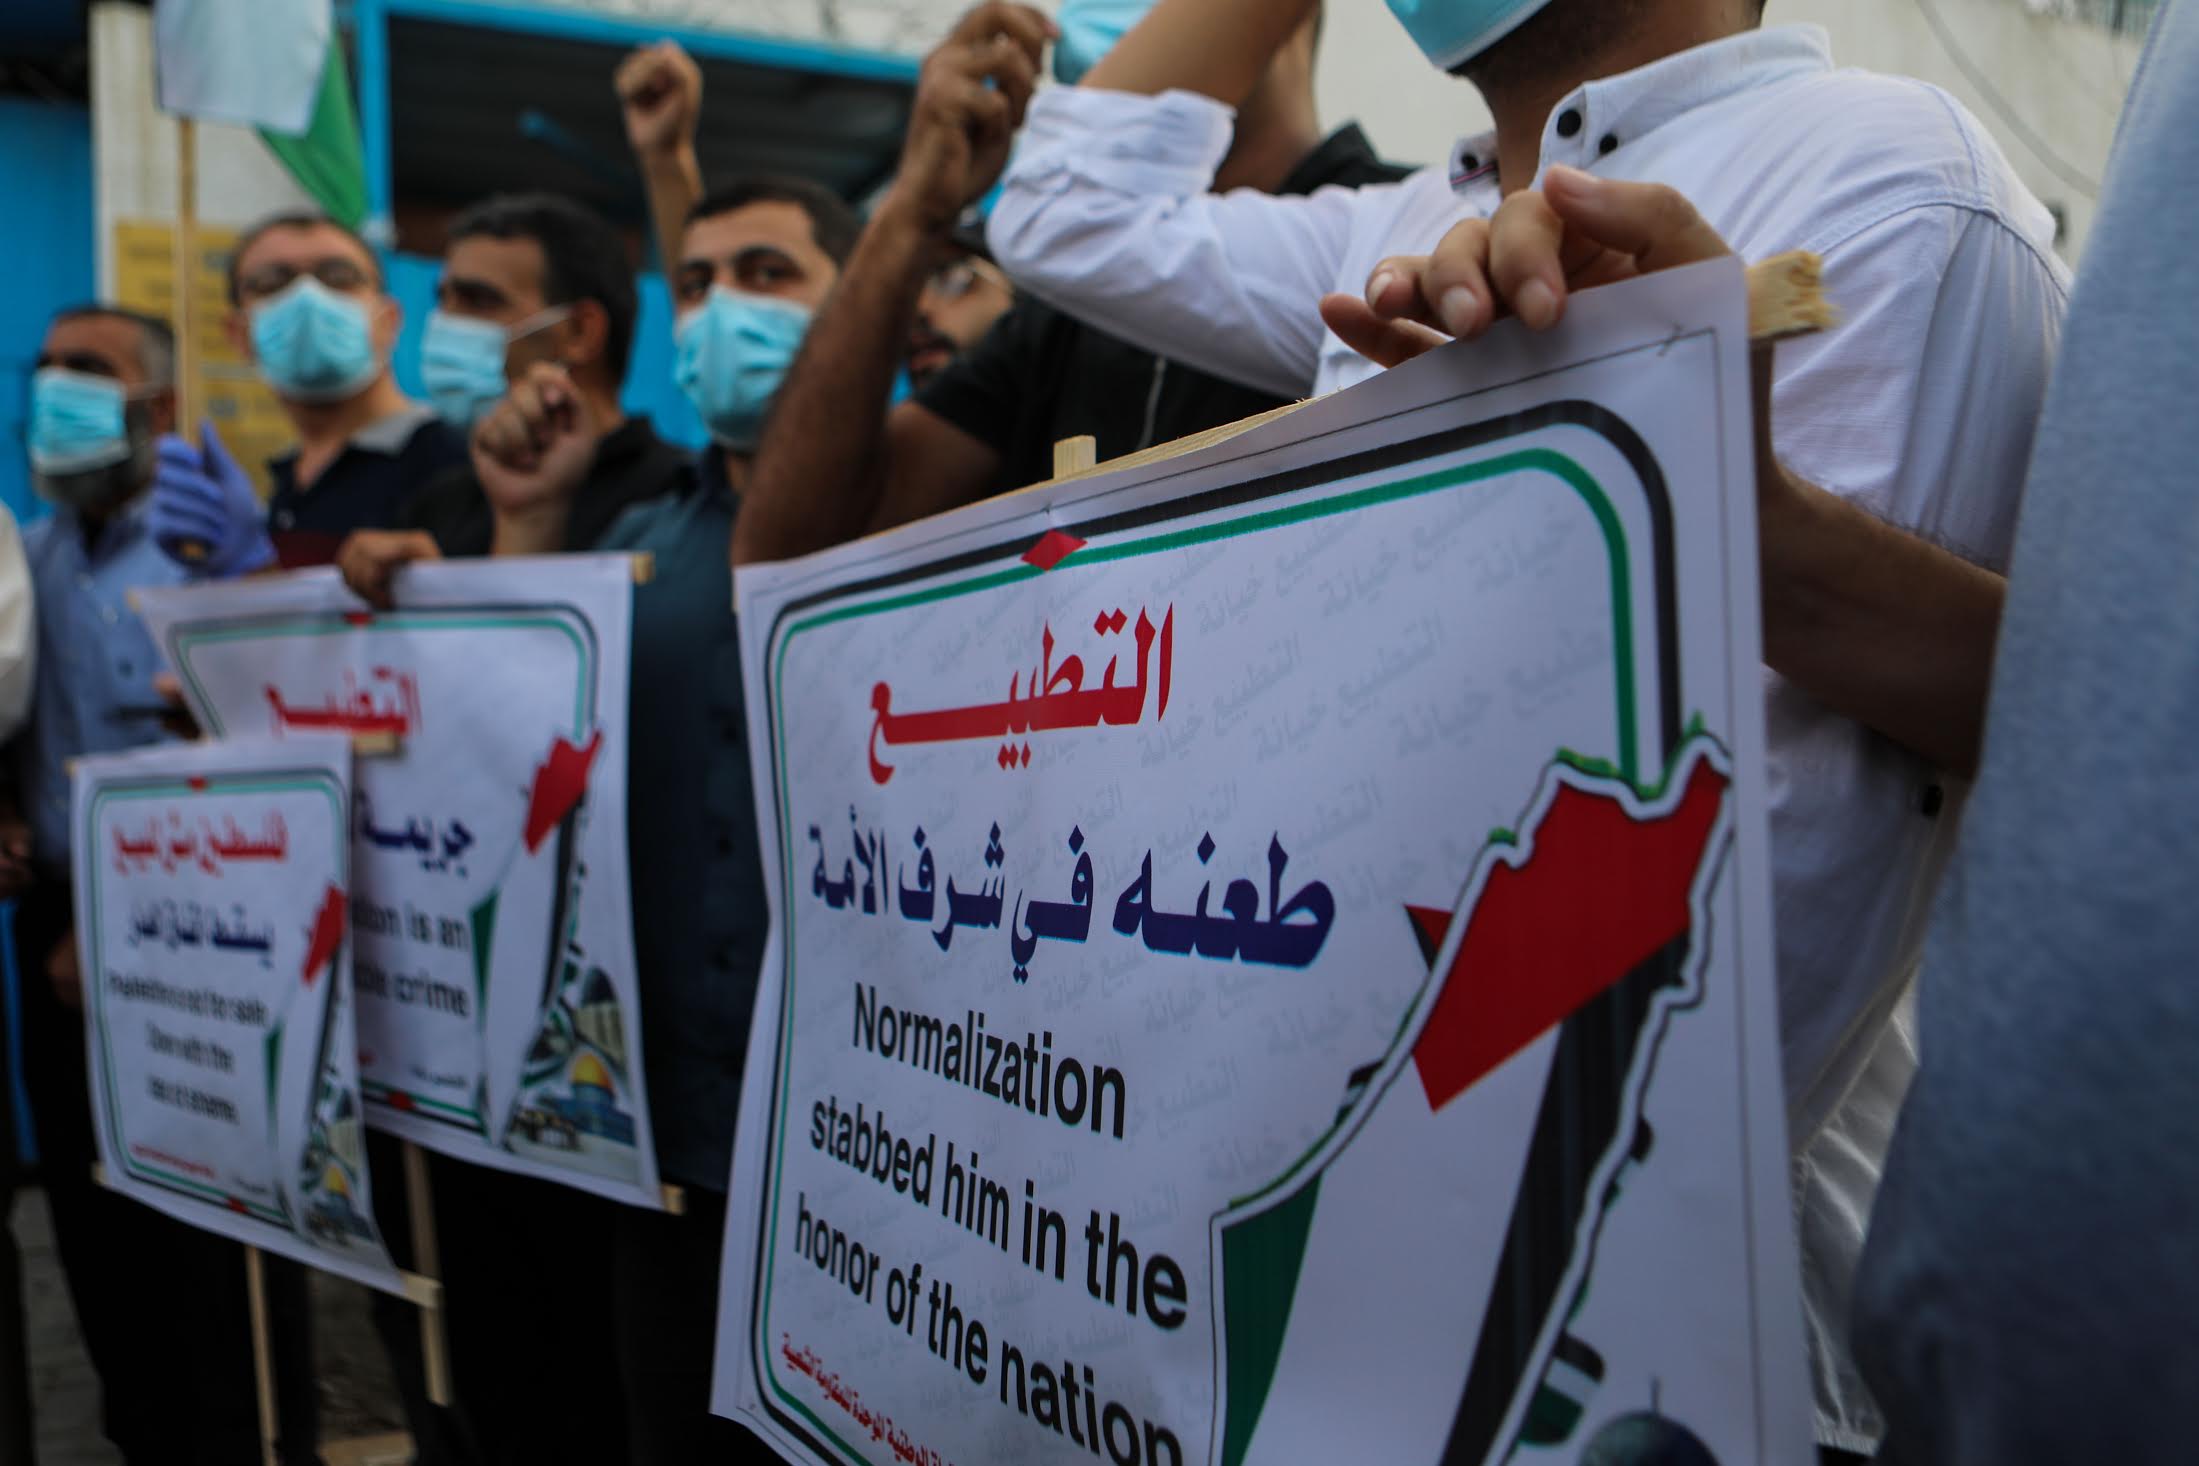 Protesters gathered in Gaza outside a Unesco building on 15 September to denounce the normalisation deals (MEE/Muhammed Alhajjar)